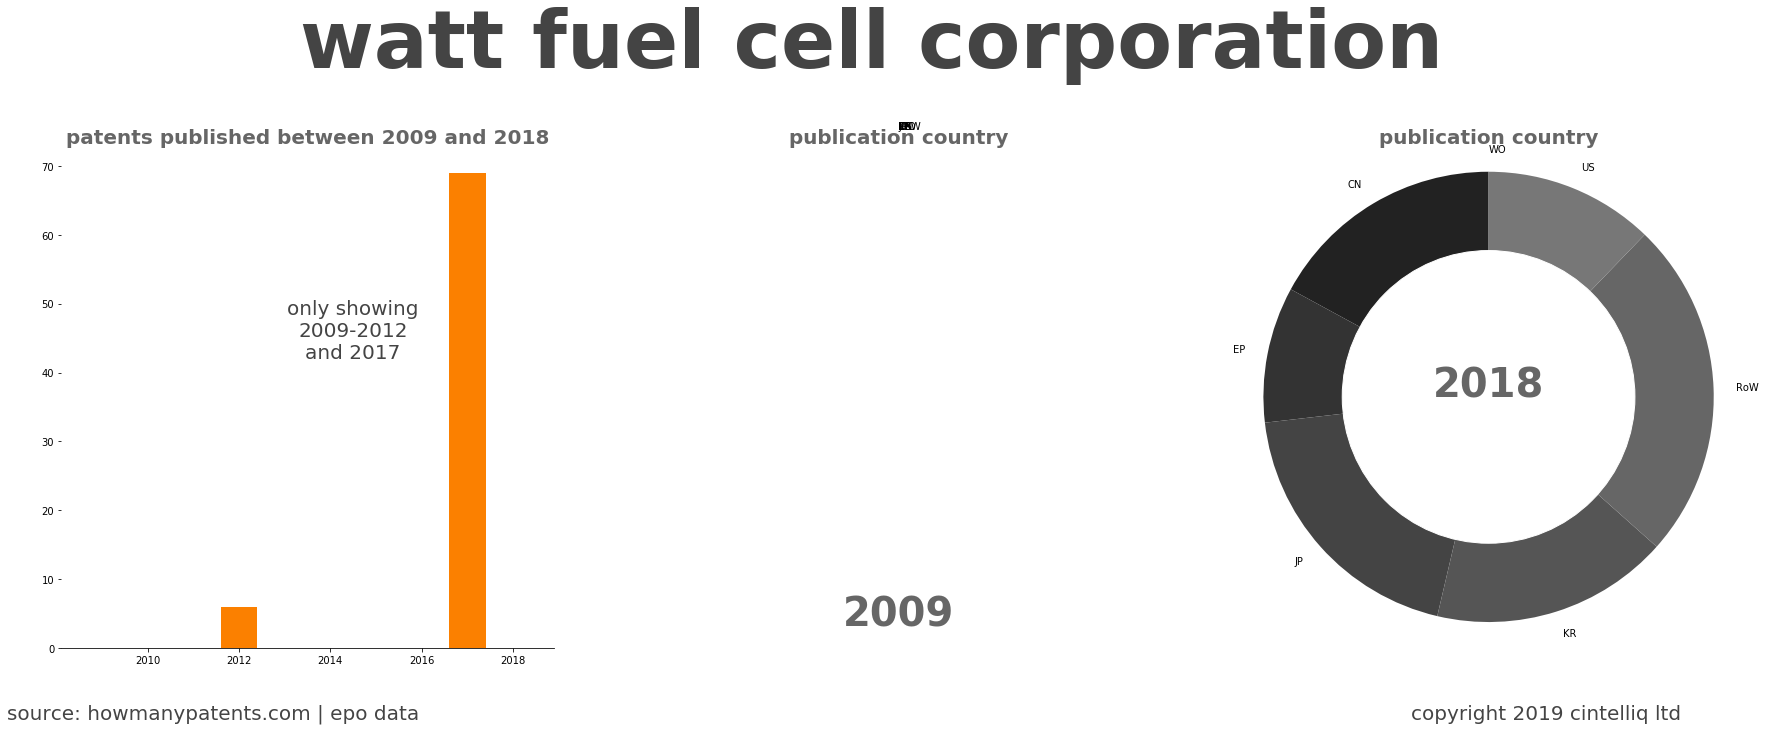 summary of patents for Watt Fuel Cell Corporation